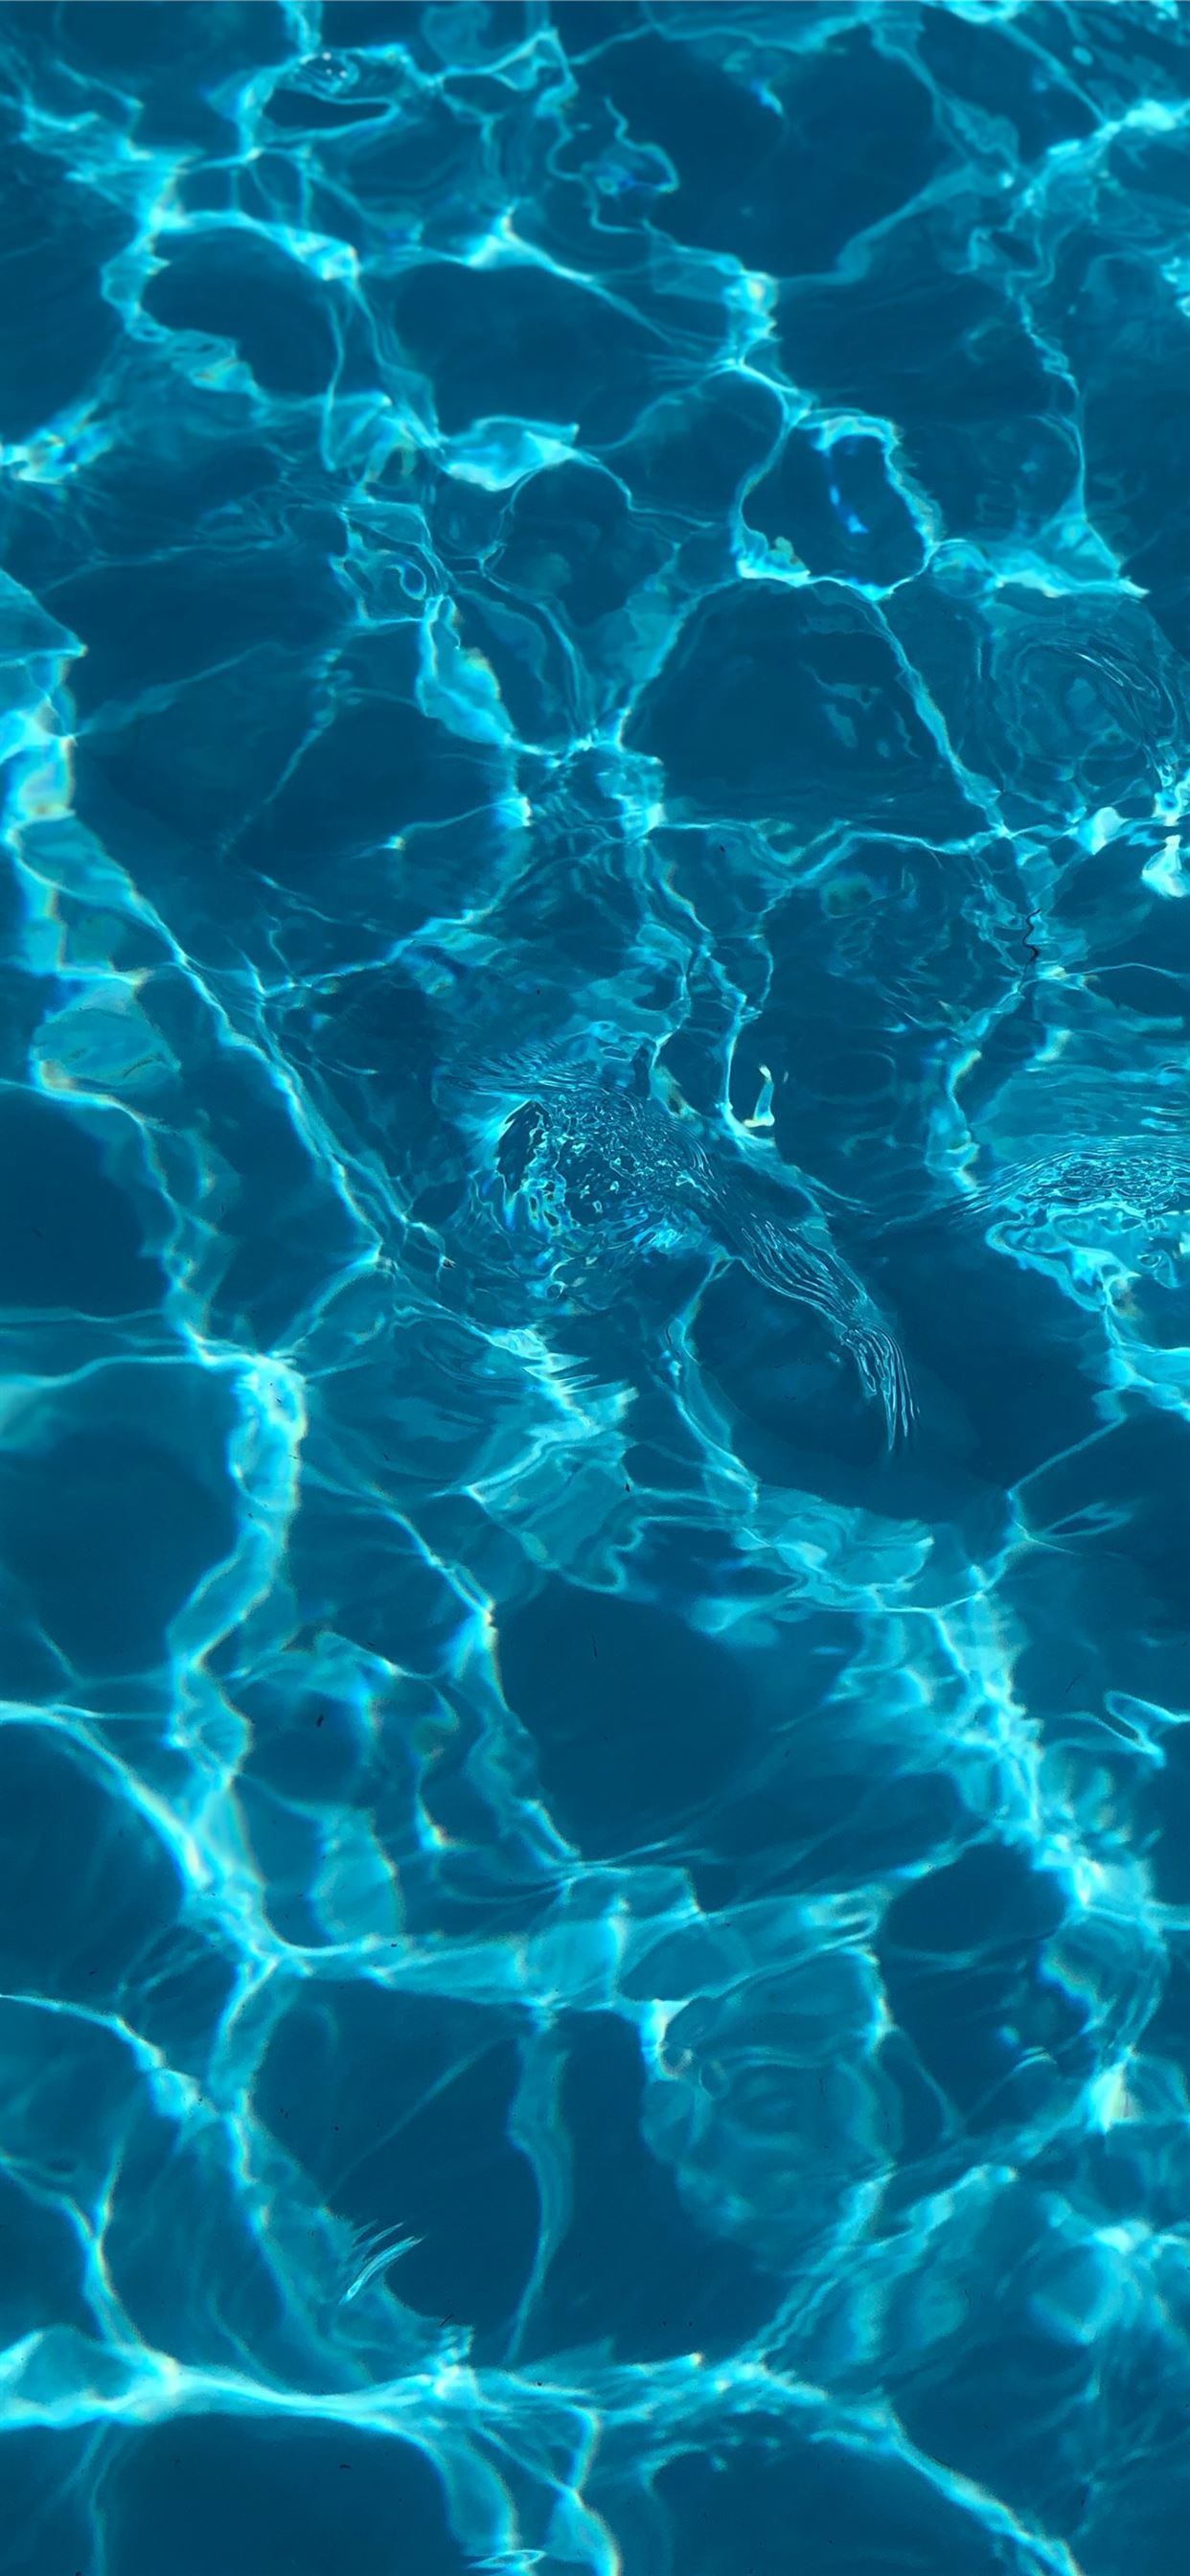 A close up of water in the pool - Ocean